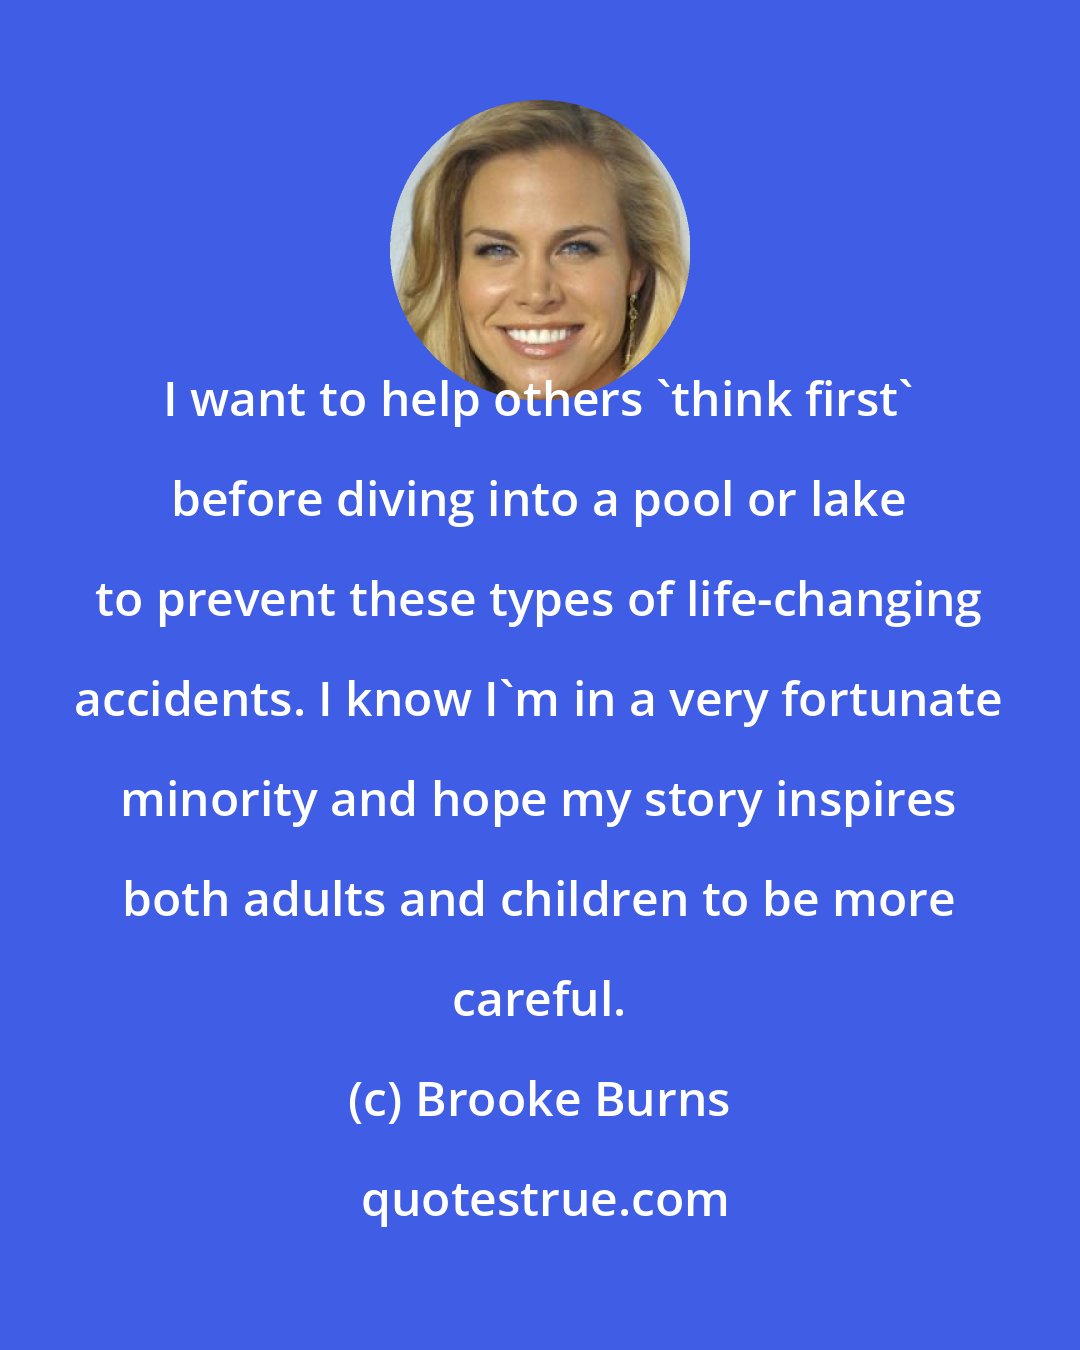 Brooke Burns: I want to help others 'think first' before diving into a pool or lake to prevent these types of life-changing accidents. I know I'm in a very fortunate minority and hope my story inspires both adults and children to be more careful.